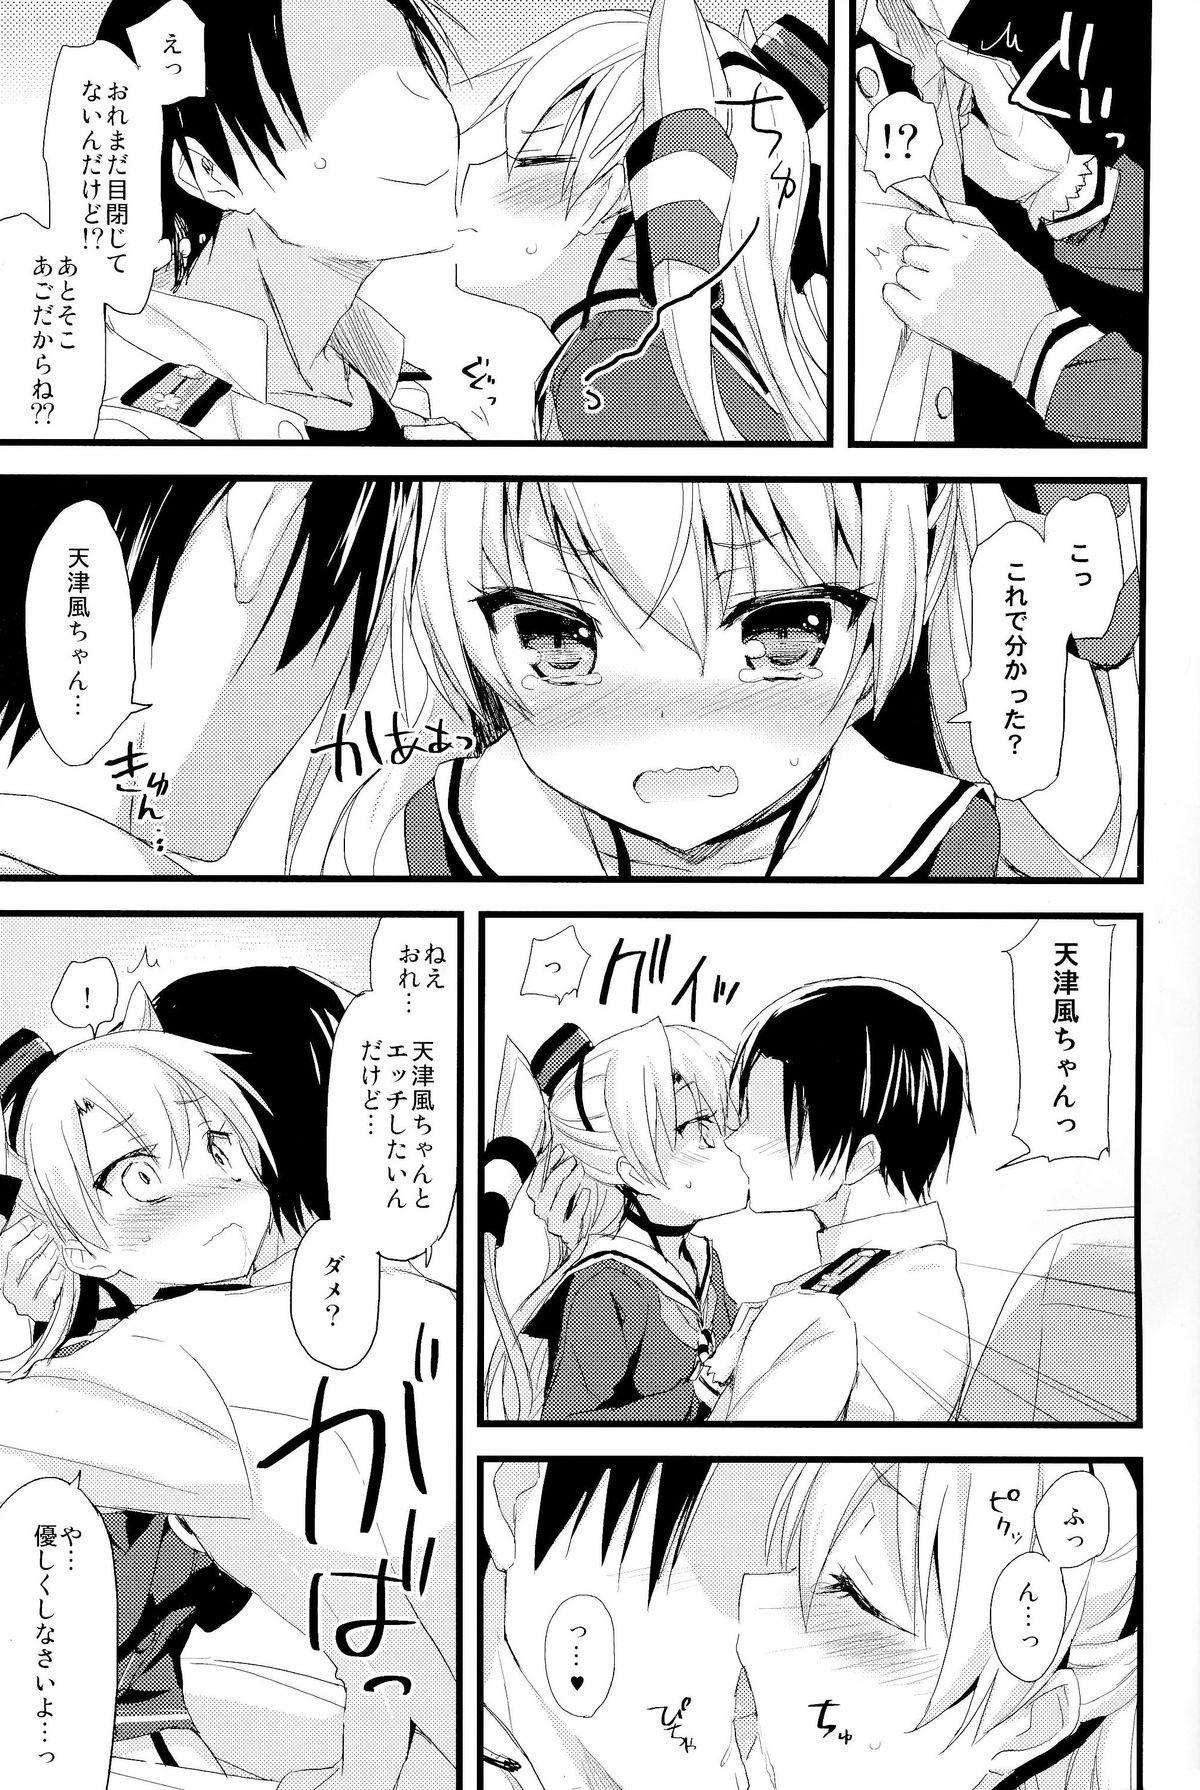 Teenage Porn ∞Oooverheat↑ - Kantai collection Adolescente - Page 10